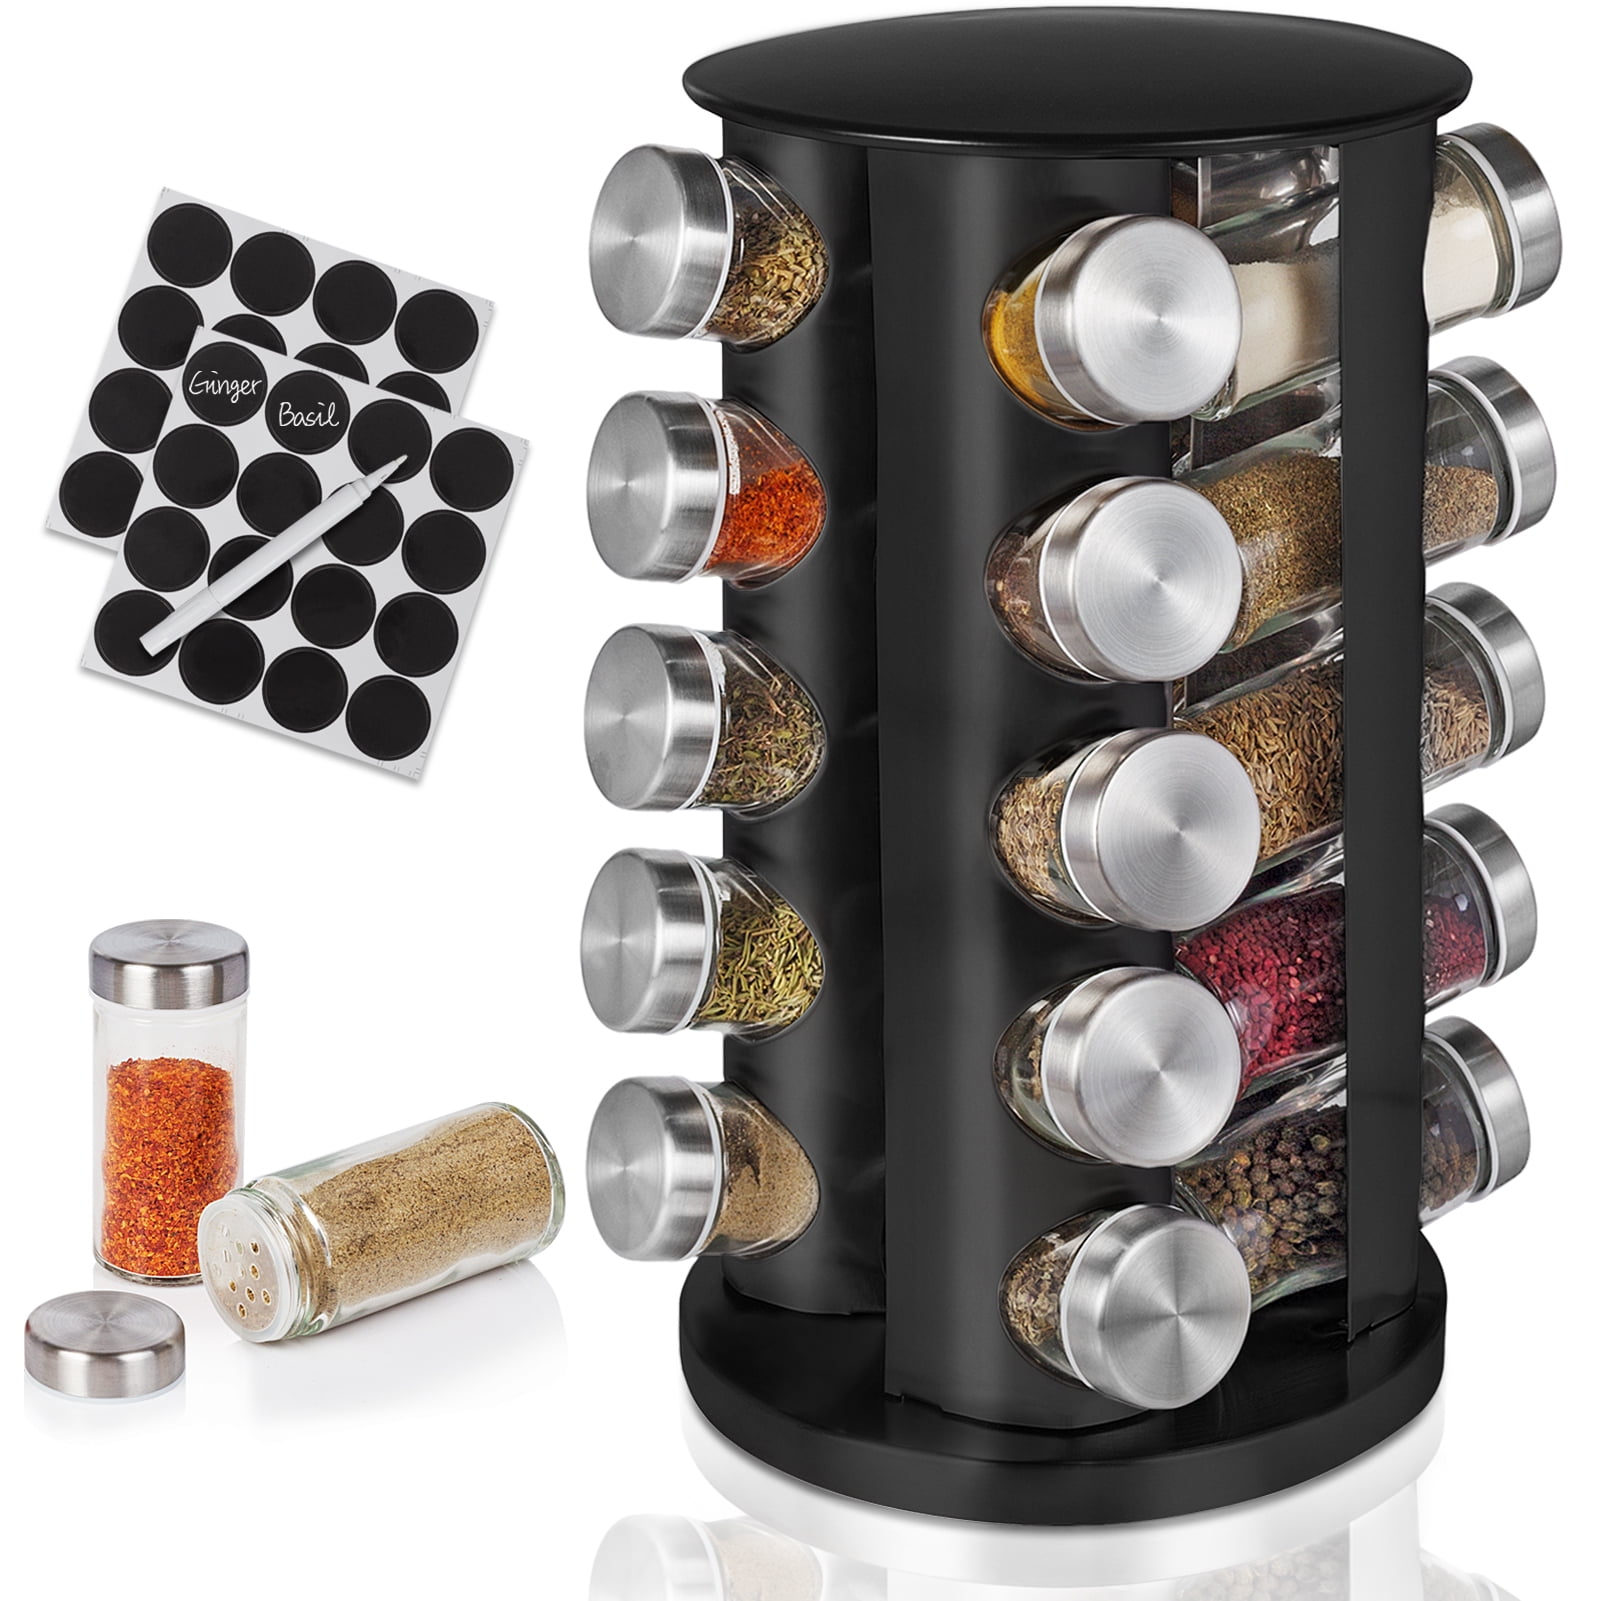 KOKM Revolving Spice Rack, 6-Jar Seasoning Organizer Holder 360° Rotation  Shelf Tower Set with 6 Glass Spice Refill Containers Jars for Cabinet